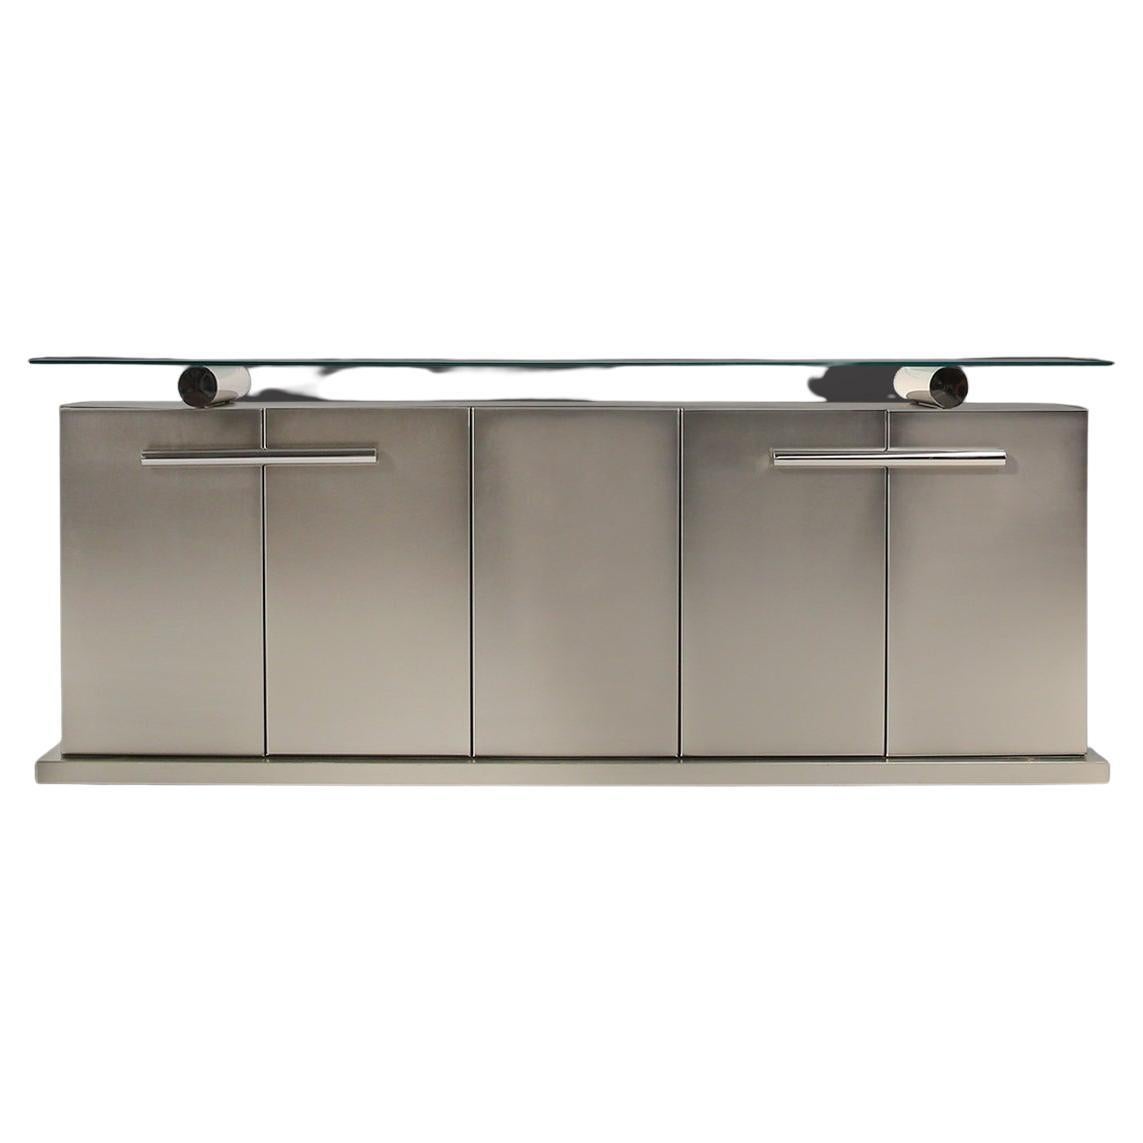 Belgo Chrom credenza in Brushed metal and chrome detailing. A thick floating glass top gives the unit a most royal presence. The four door sideboard is fitted with chrome handles and is in amazing condition. In the style of Maison Jansen. A truly